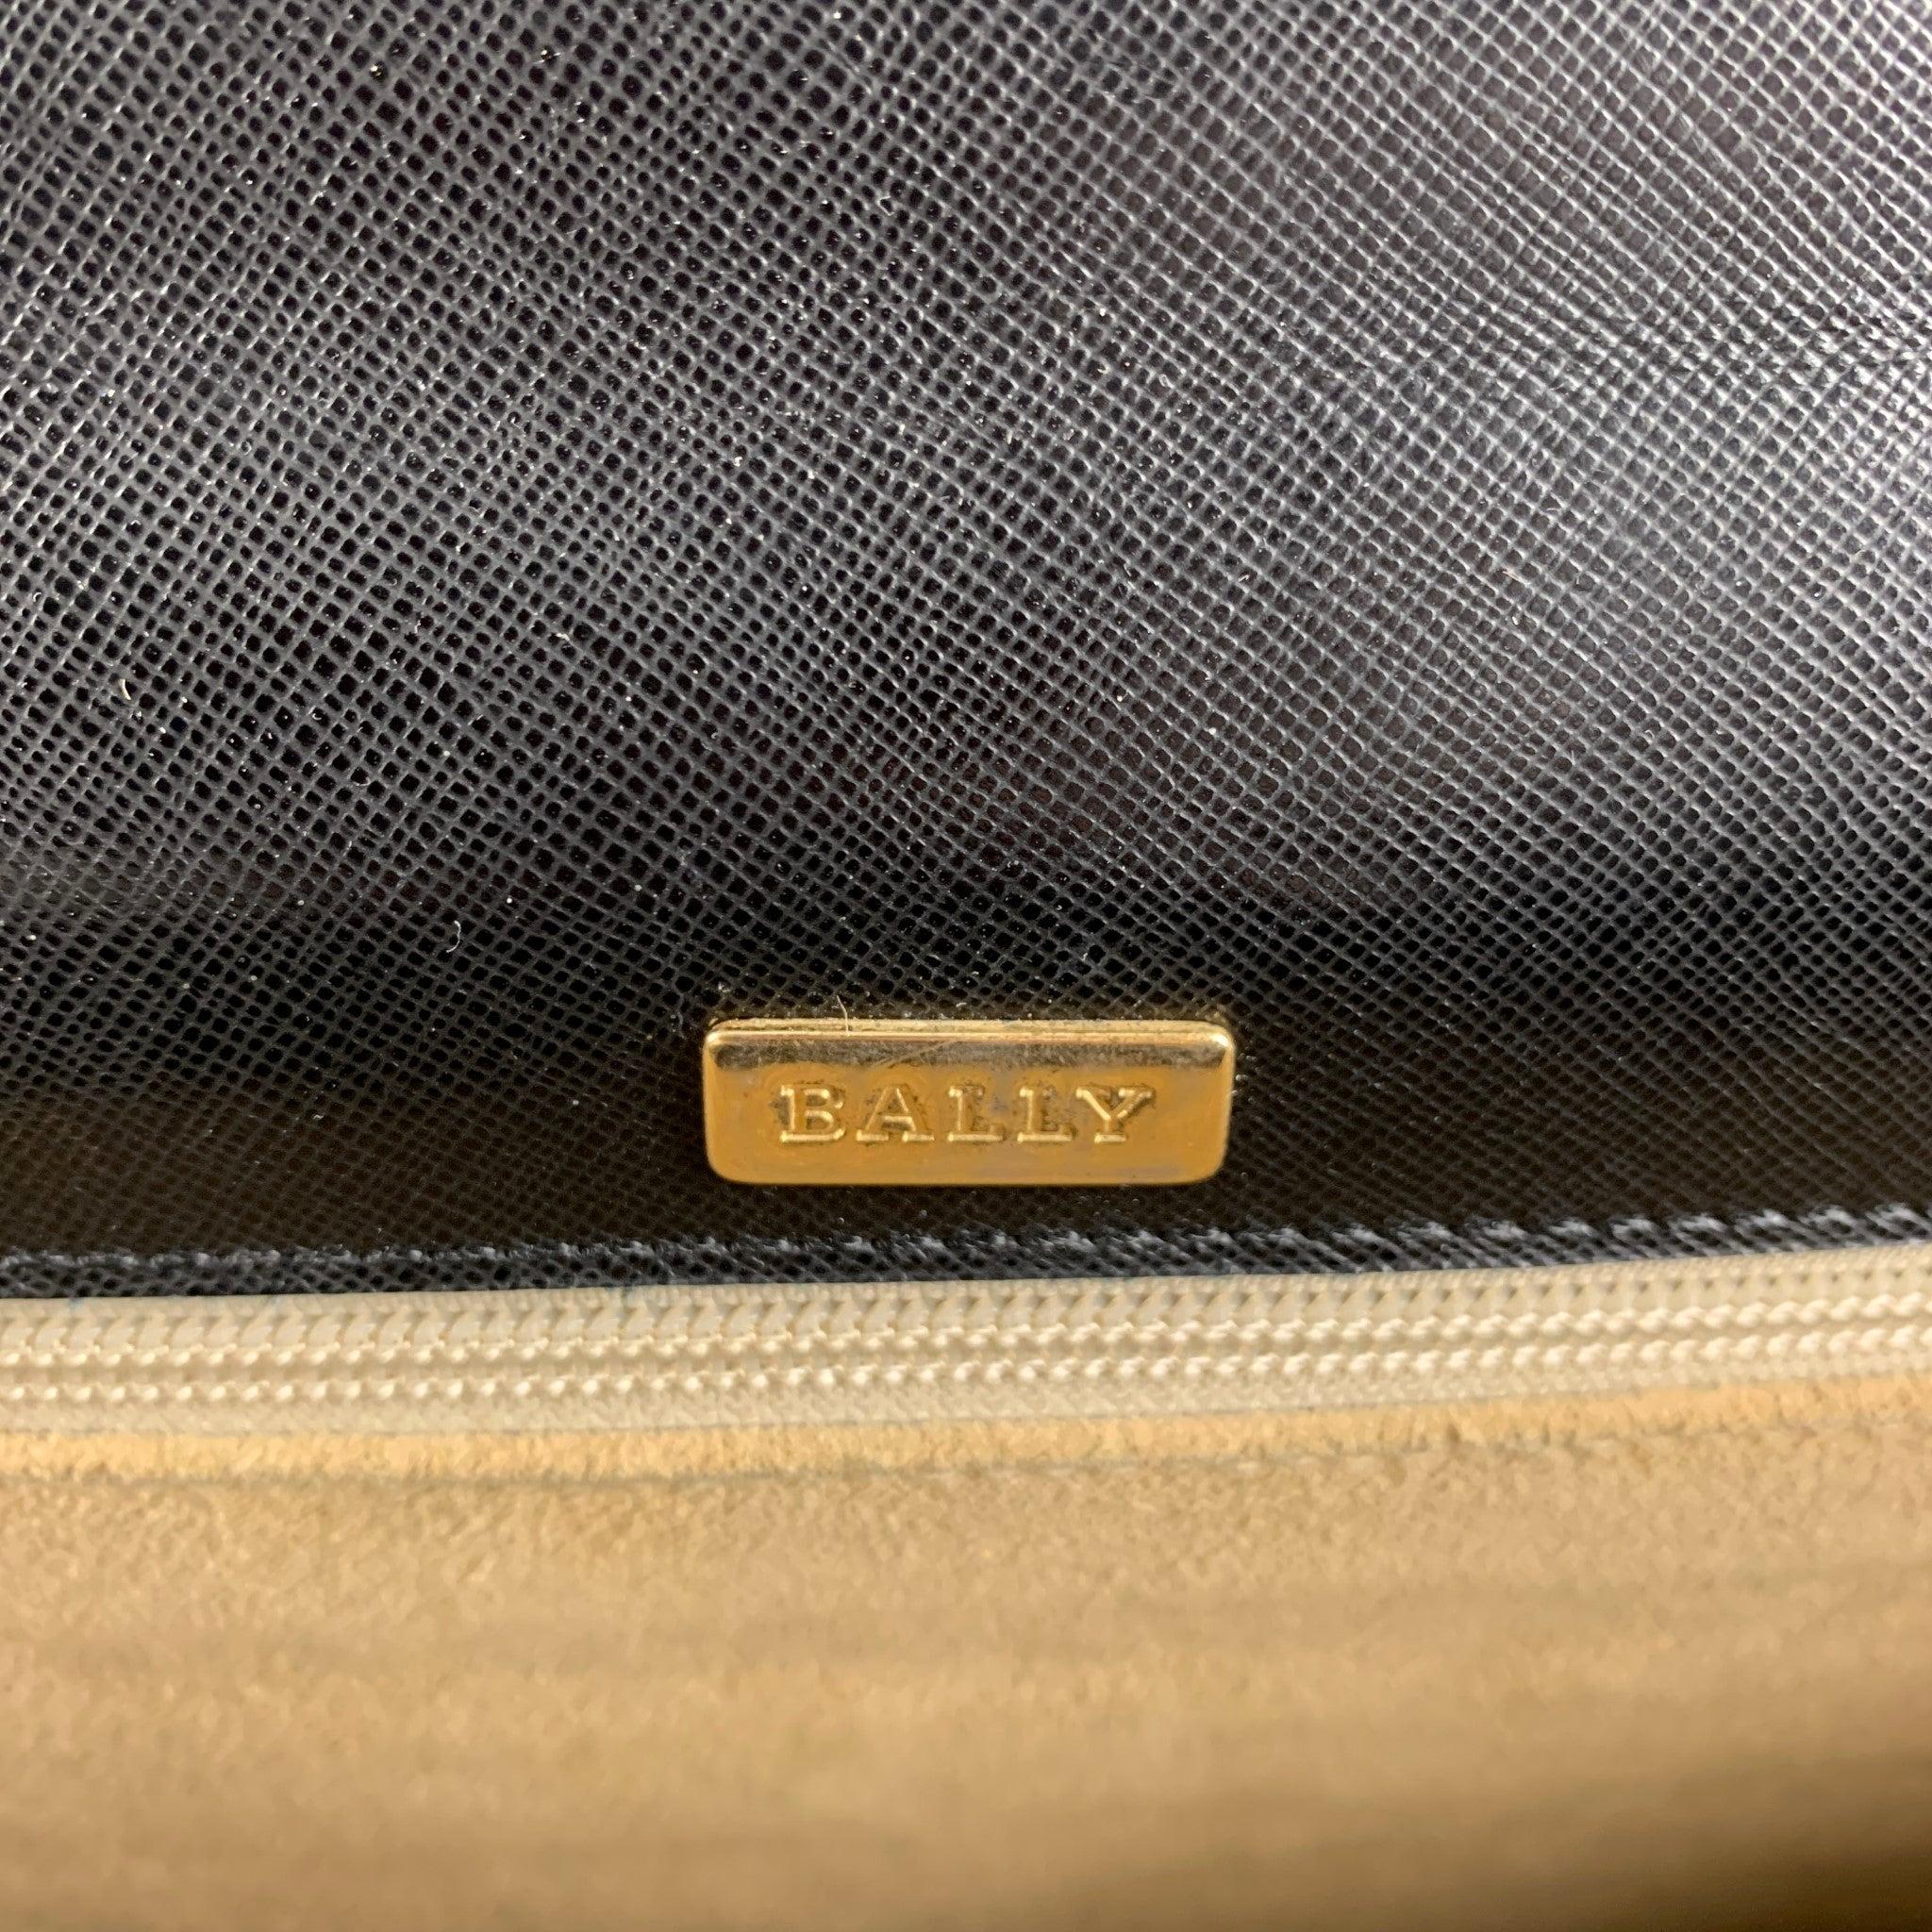 BALLY Black Leather Briefcase Bags 7